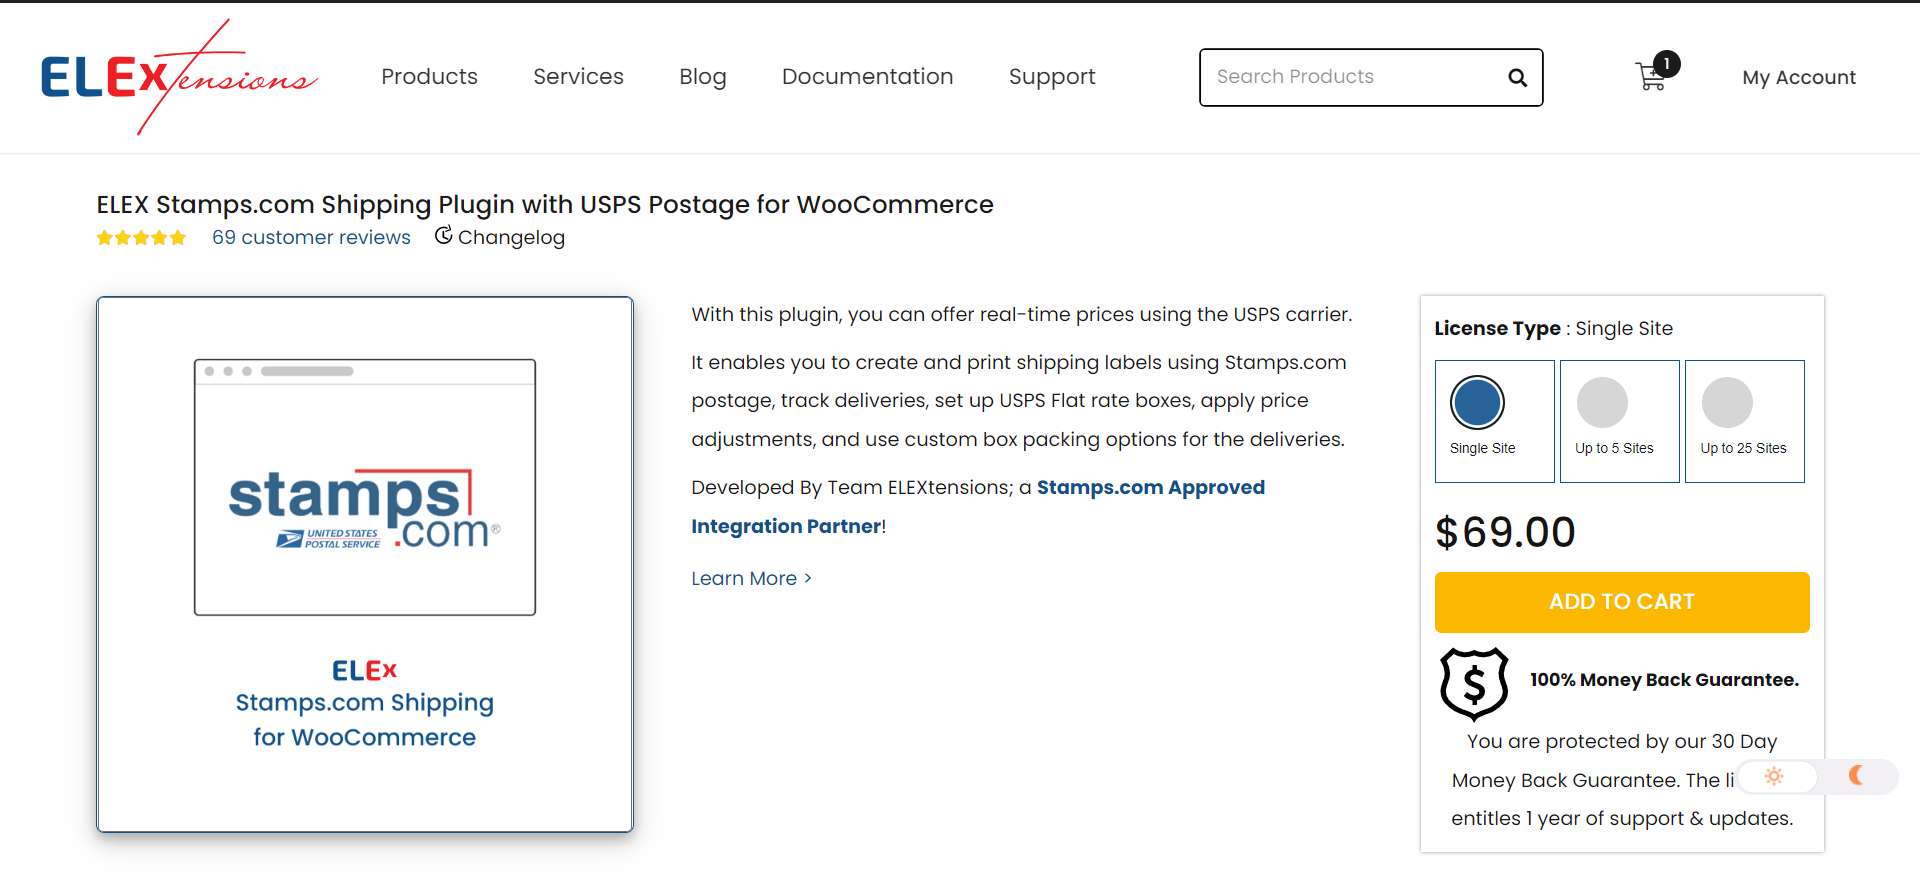 ELEX Stamps.com Shipping Plugin with USPS Postage for WooCommerce